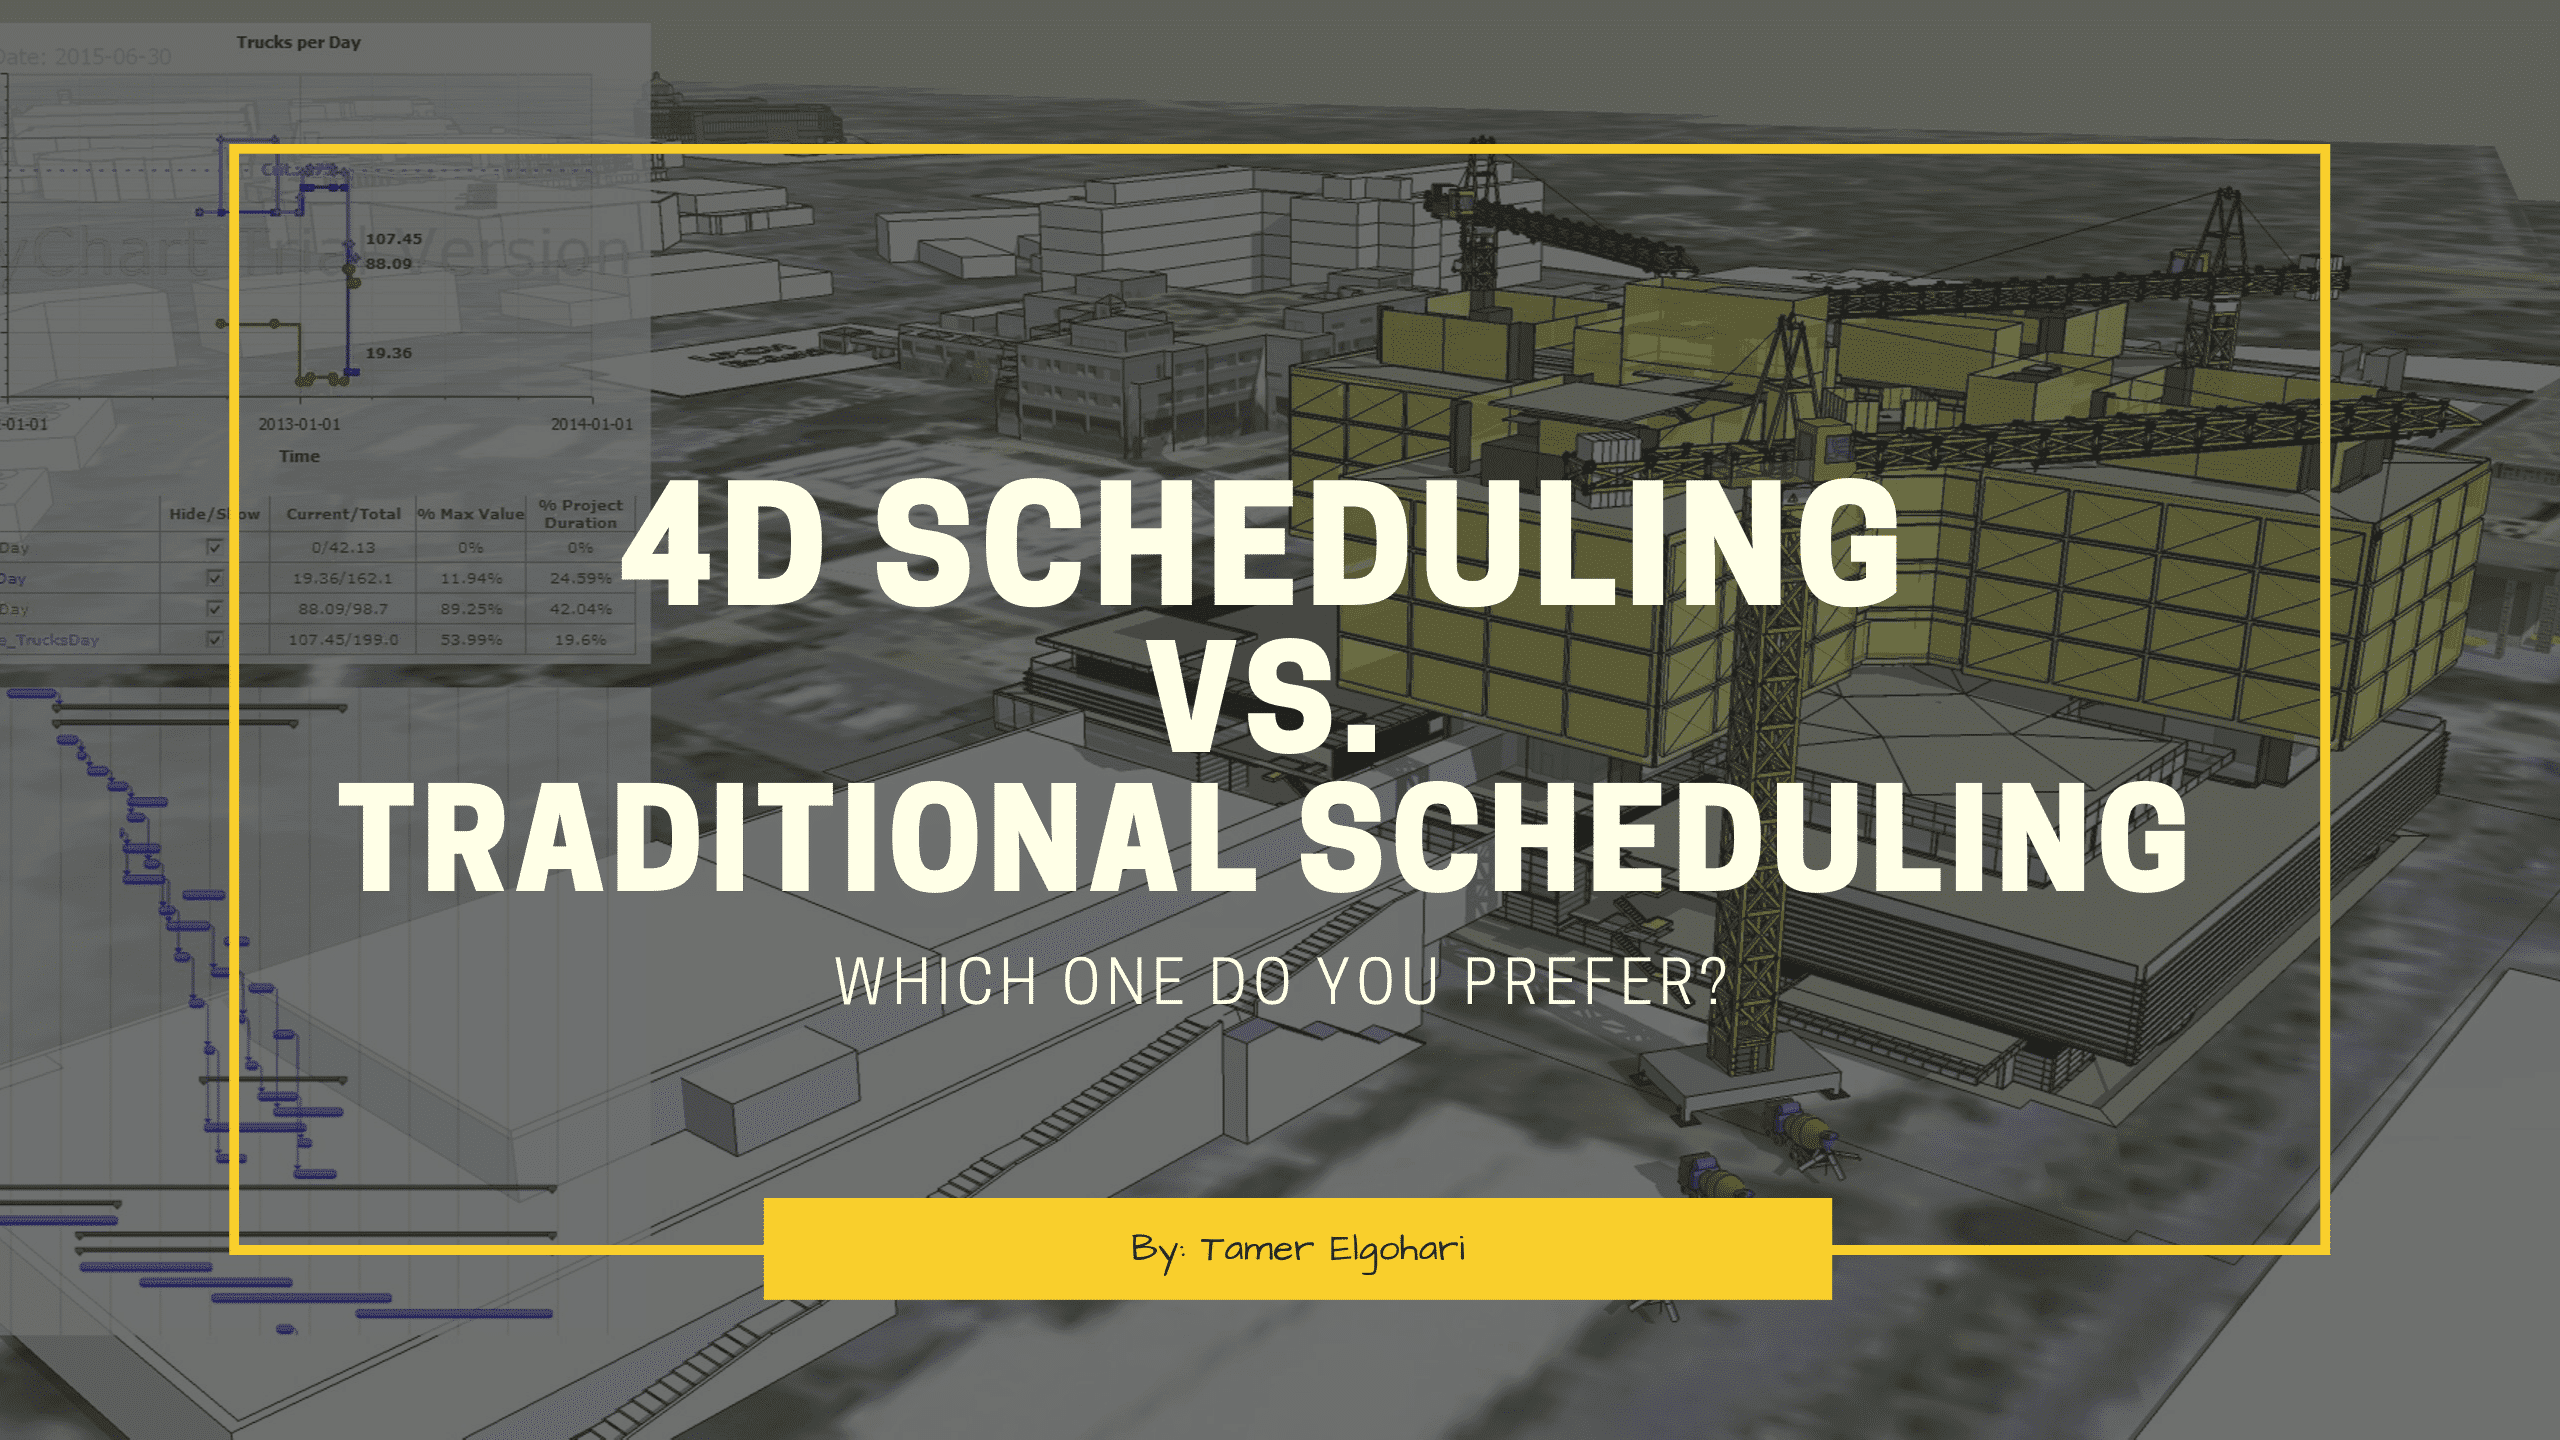 5 Best Tips to Implement 4D BIM for Construction Scheduling